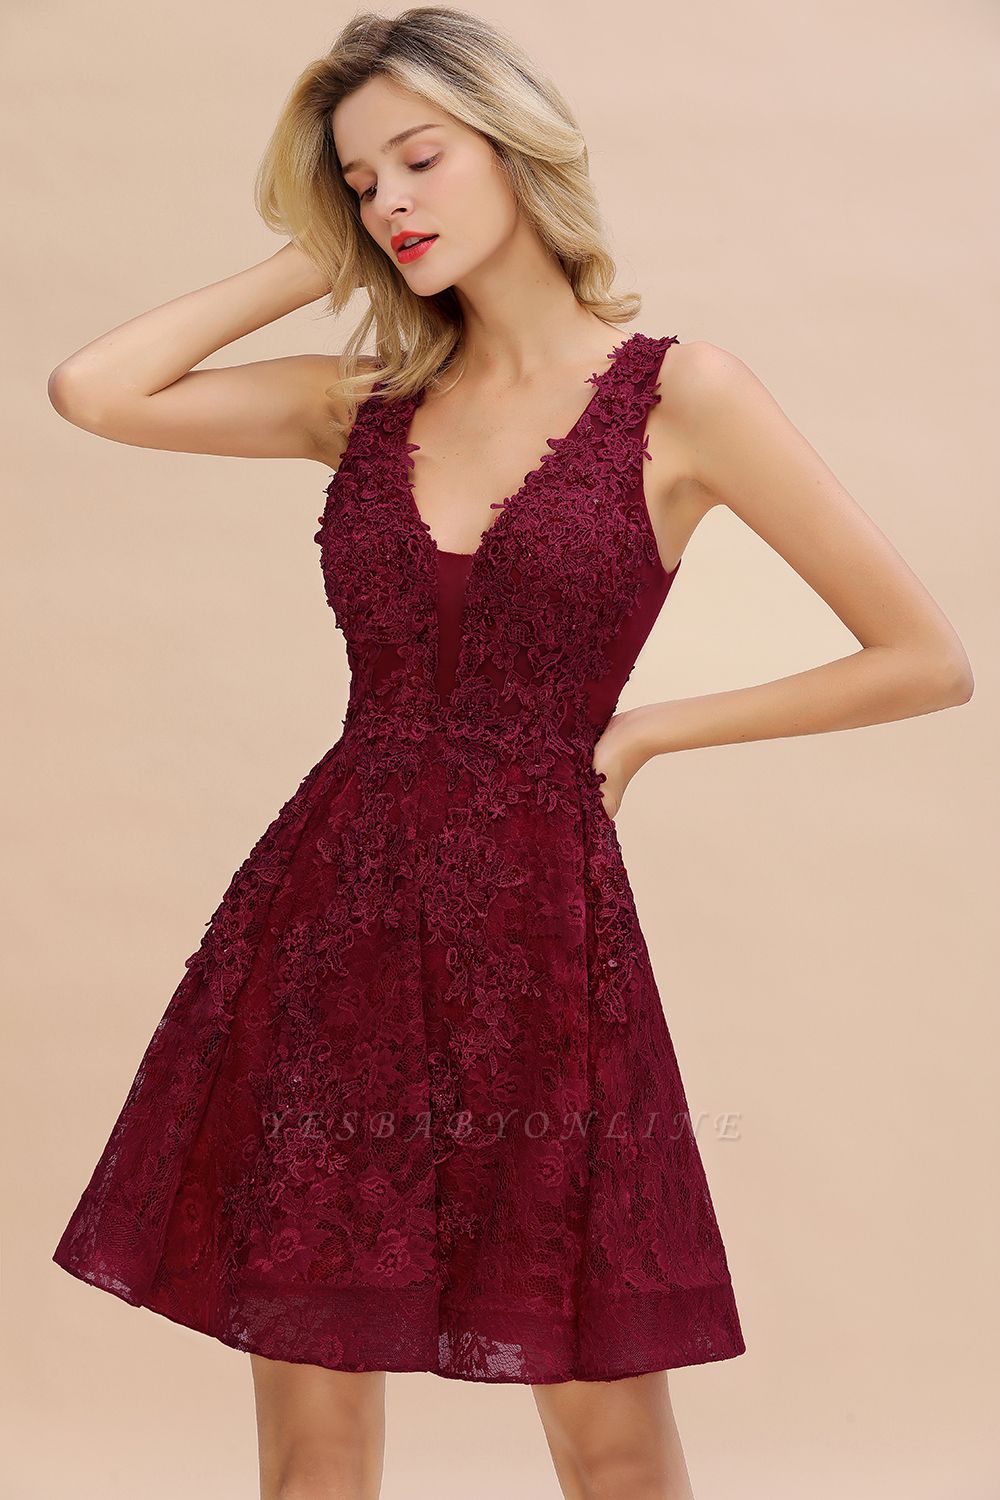 https://www.yesbabyonline.com/g/princess-v-neck-knee-length-lace-appliques-homecoming-dresses-115155.html?cate_2=122?utm_source=blog&utm_medium=theversicle&utm_campaign=post&source=theversicle